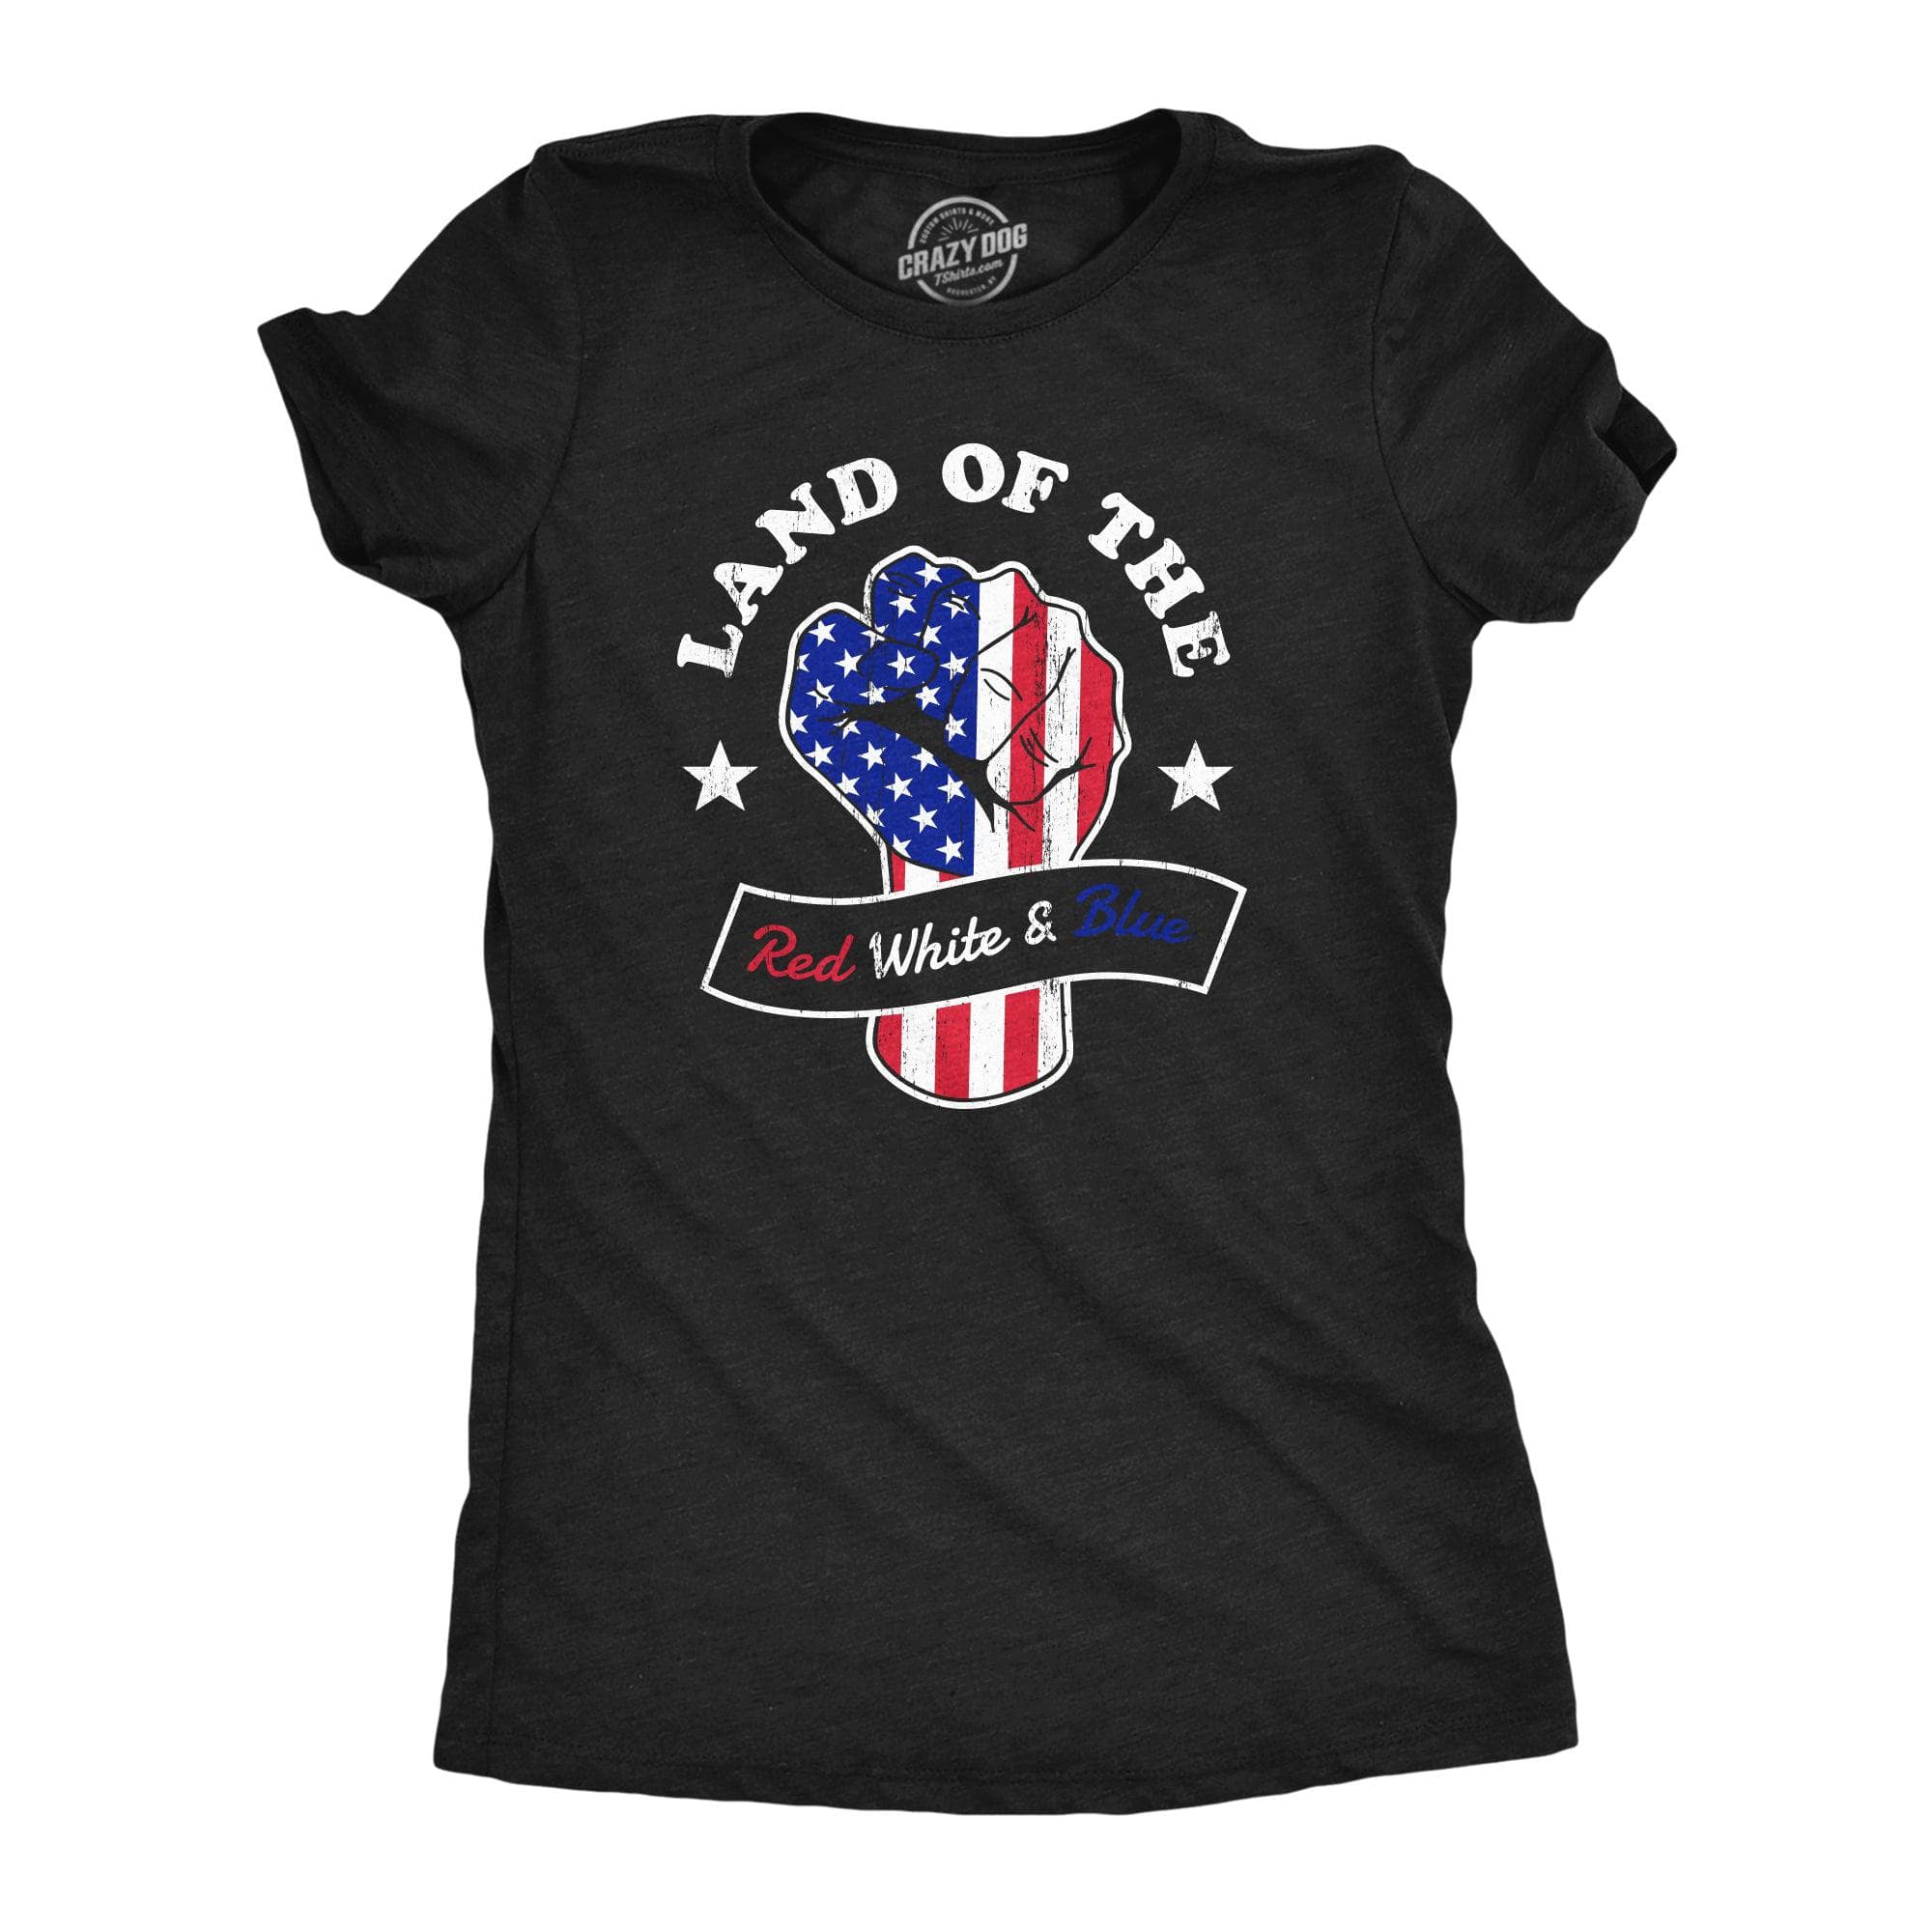 Land Of The Red White And Blue Women's Tshirt  -  Crazy Dog T-Shirts